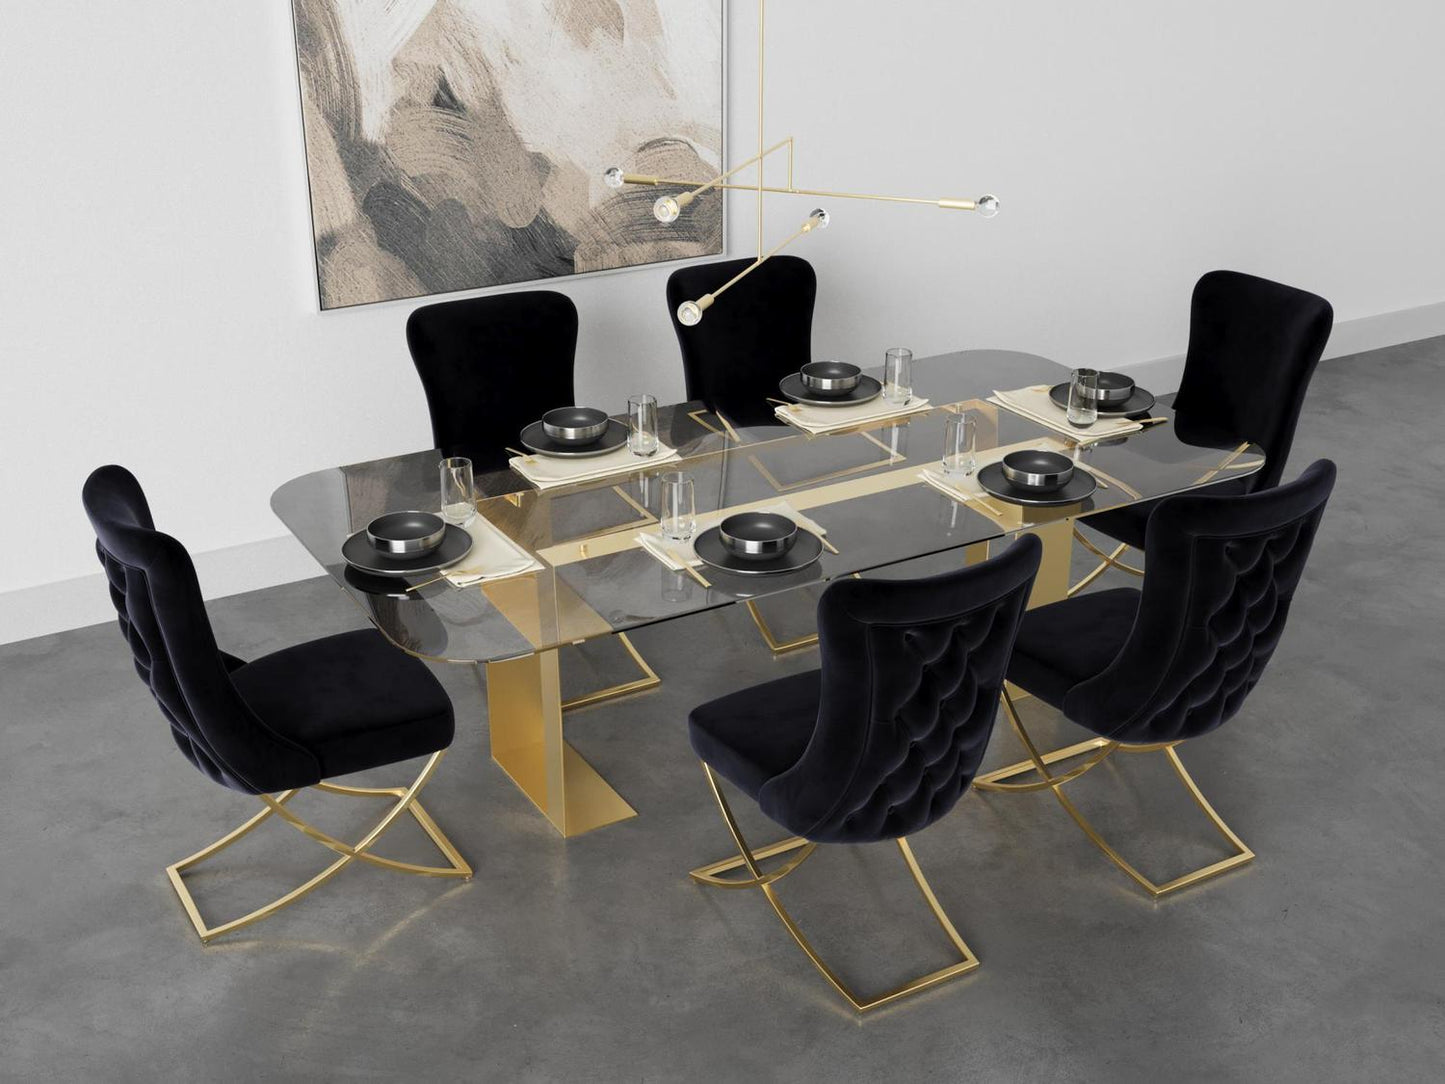 Sultan Collection Wing Back, Modern design, upholstered dining chair in Black with Gold Metal legs in a dining room for a large gathering setup.